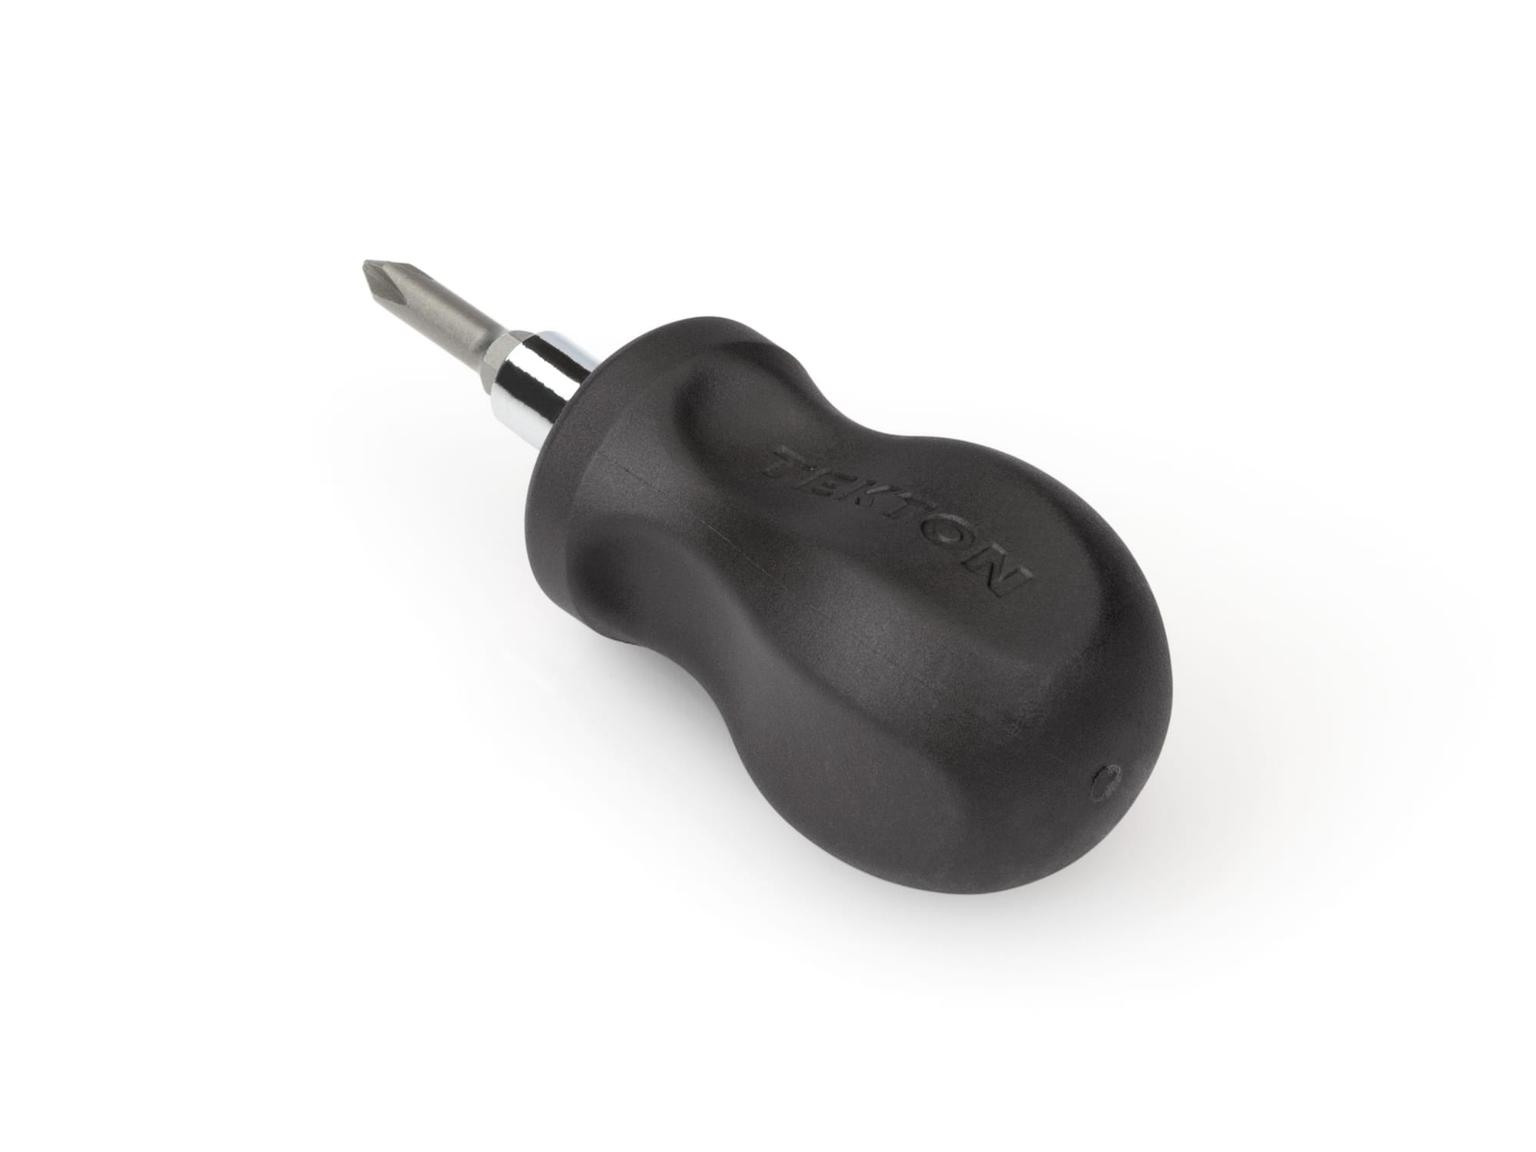 TEKTON DMT13001-T 3-in-1 Stubby Phillips/Slotted Driver (#1 x 3/16 in., Black)